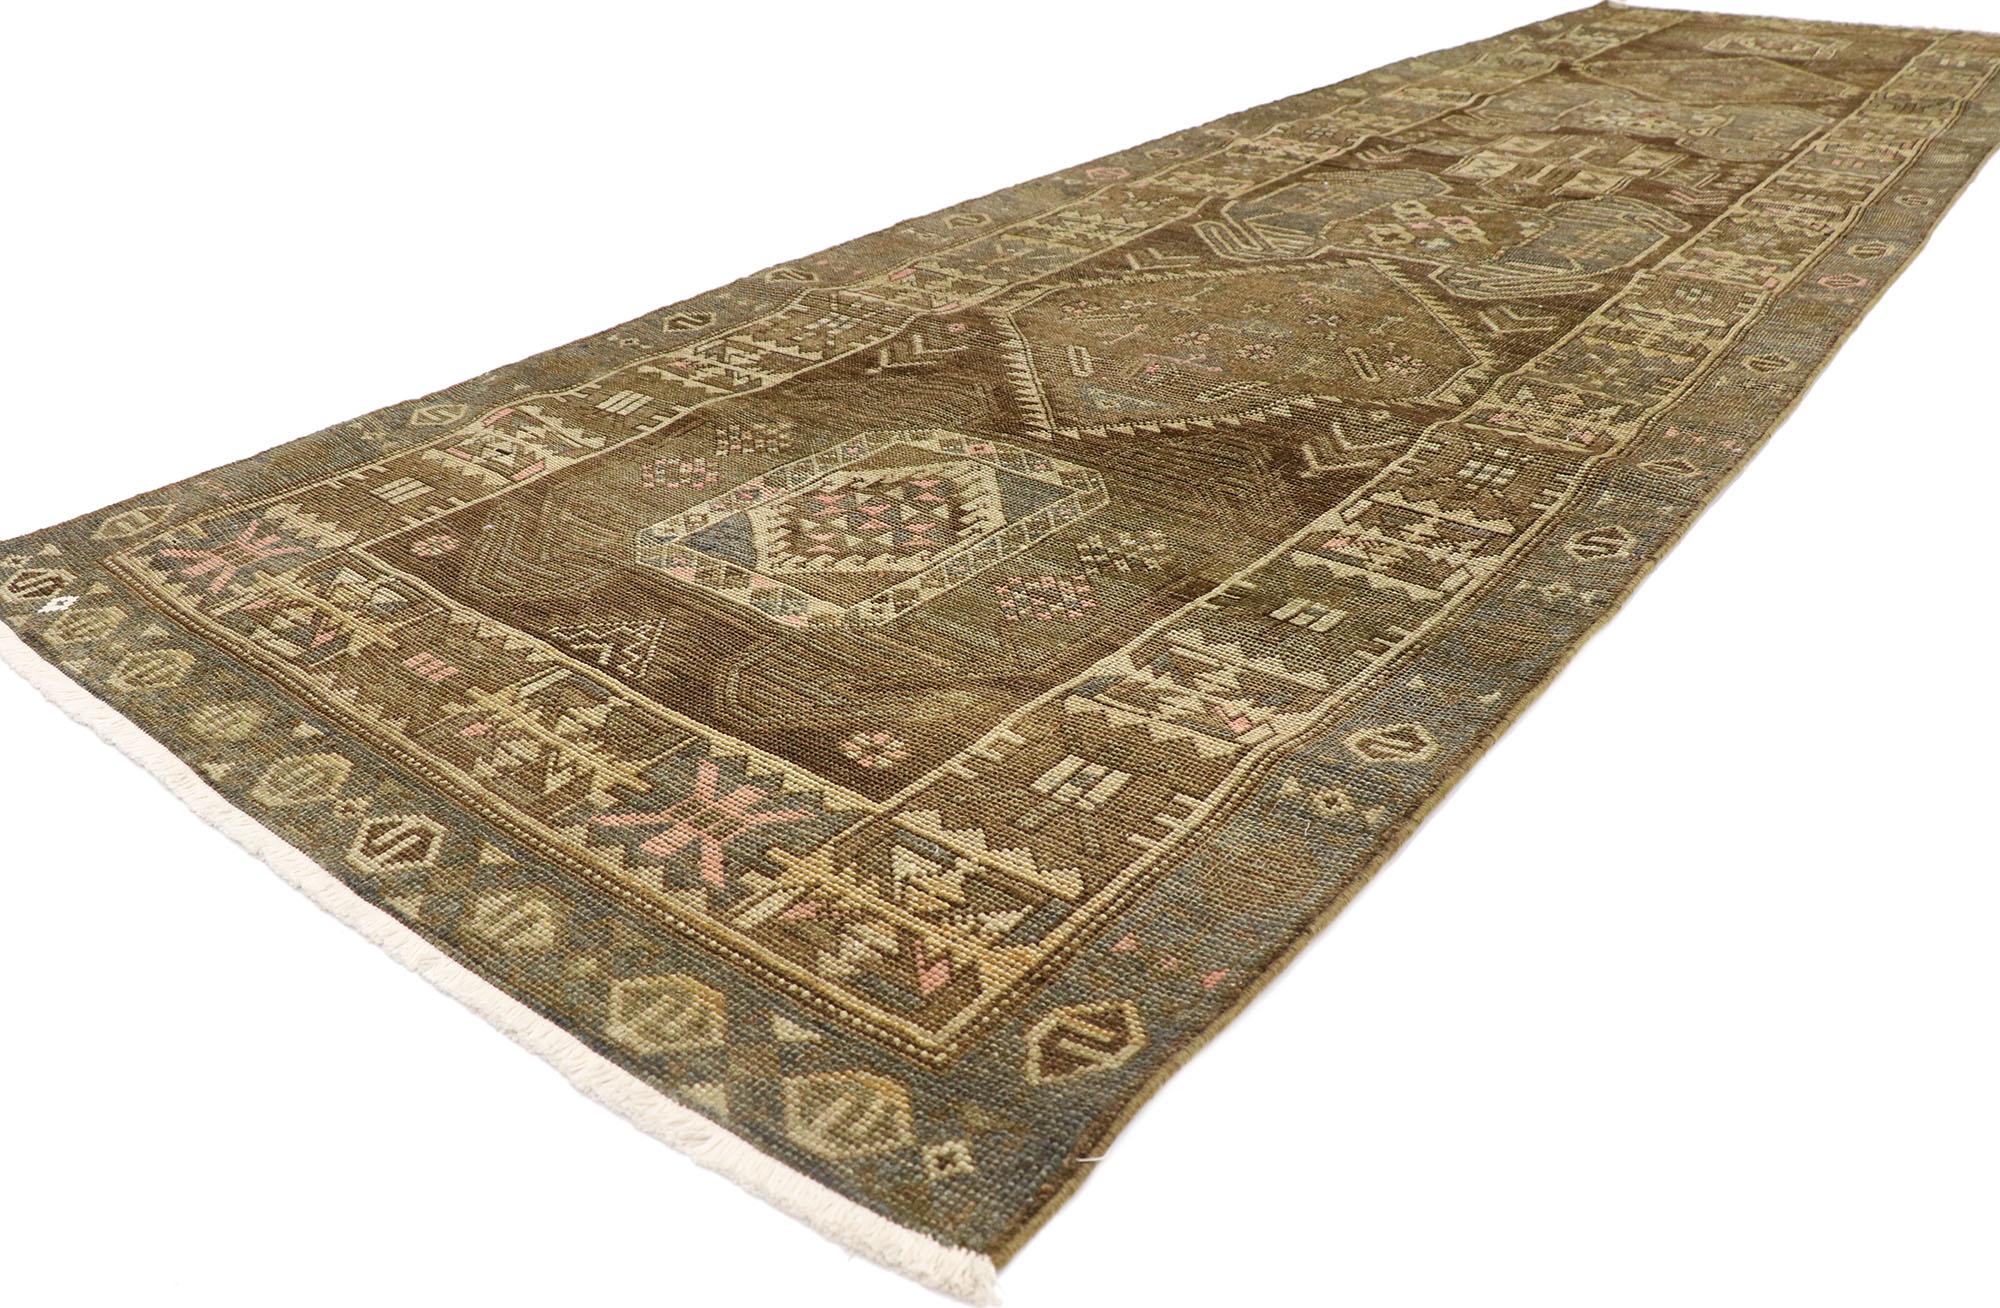 60950 Antique Persian Azerbaijan runner with Modern Tribal Style 03'10 x 13'10. Warm and inviting with a bold tribal design, yet subtle and conservative, this hand-knotted wool antique Persian Azerbaijan runner is poised to impress. The abrashed